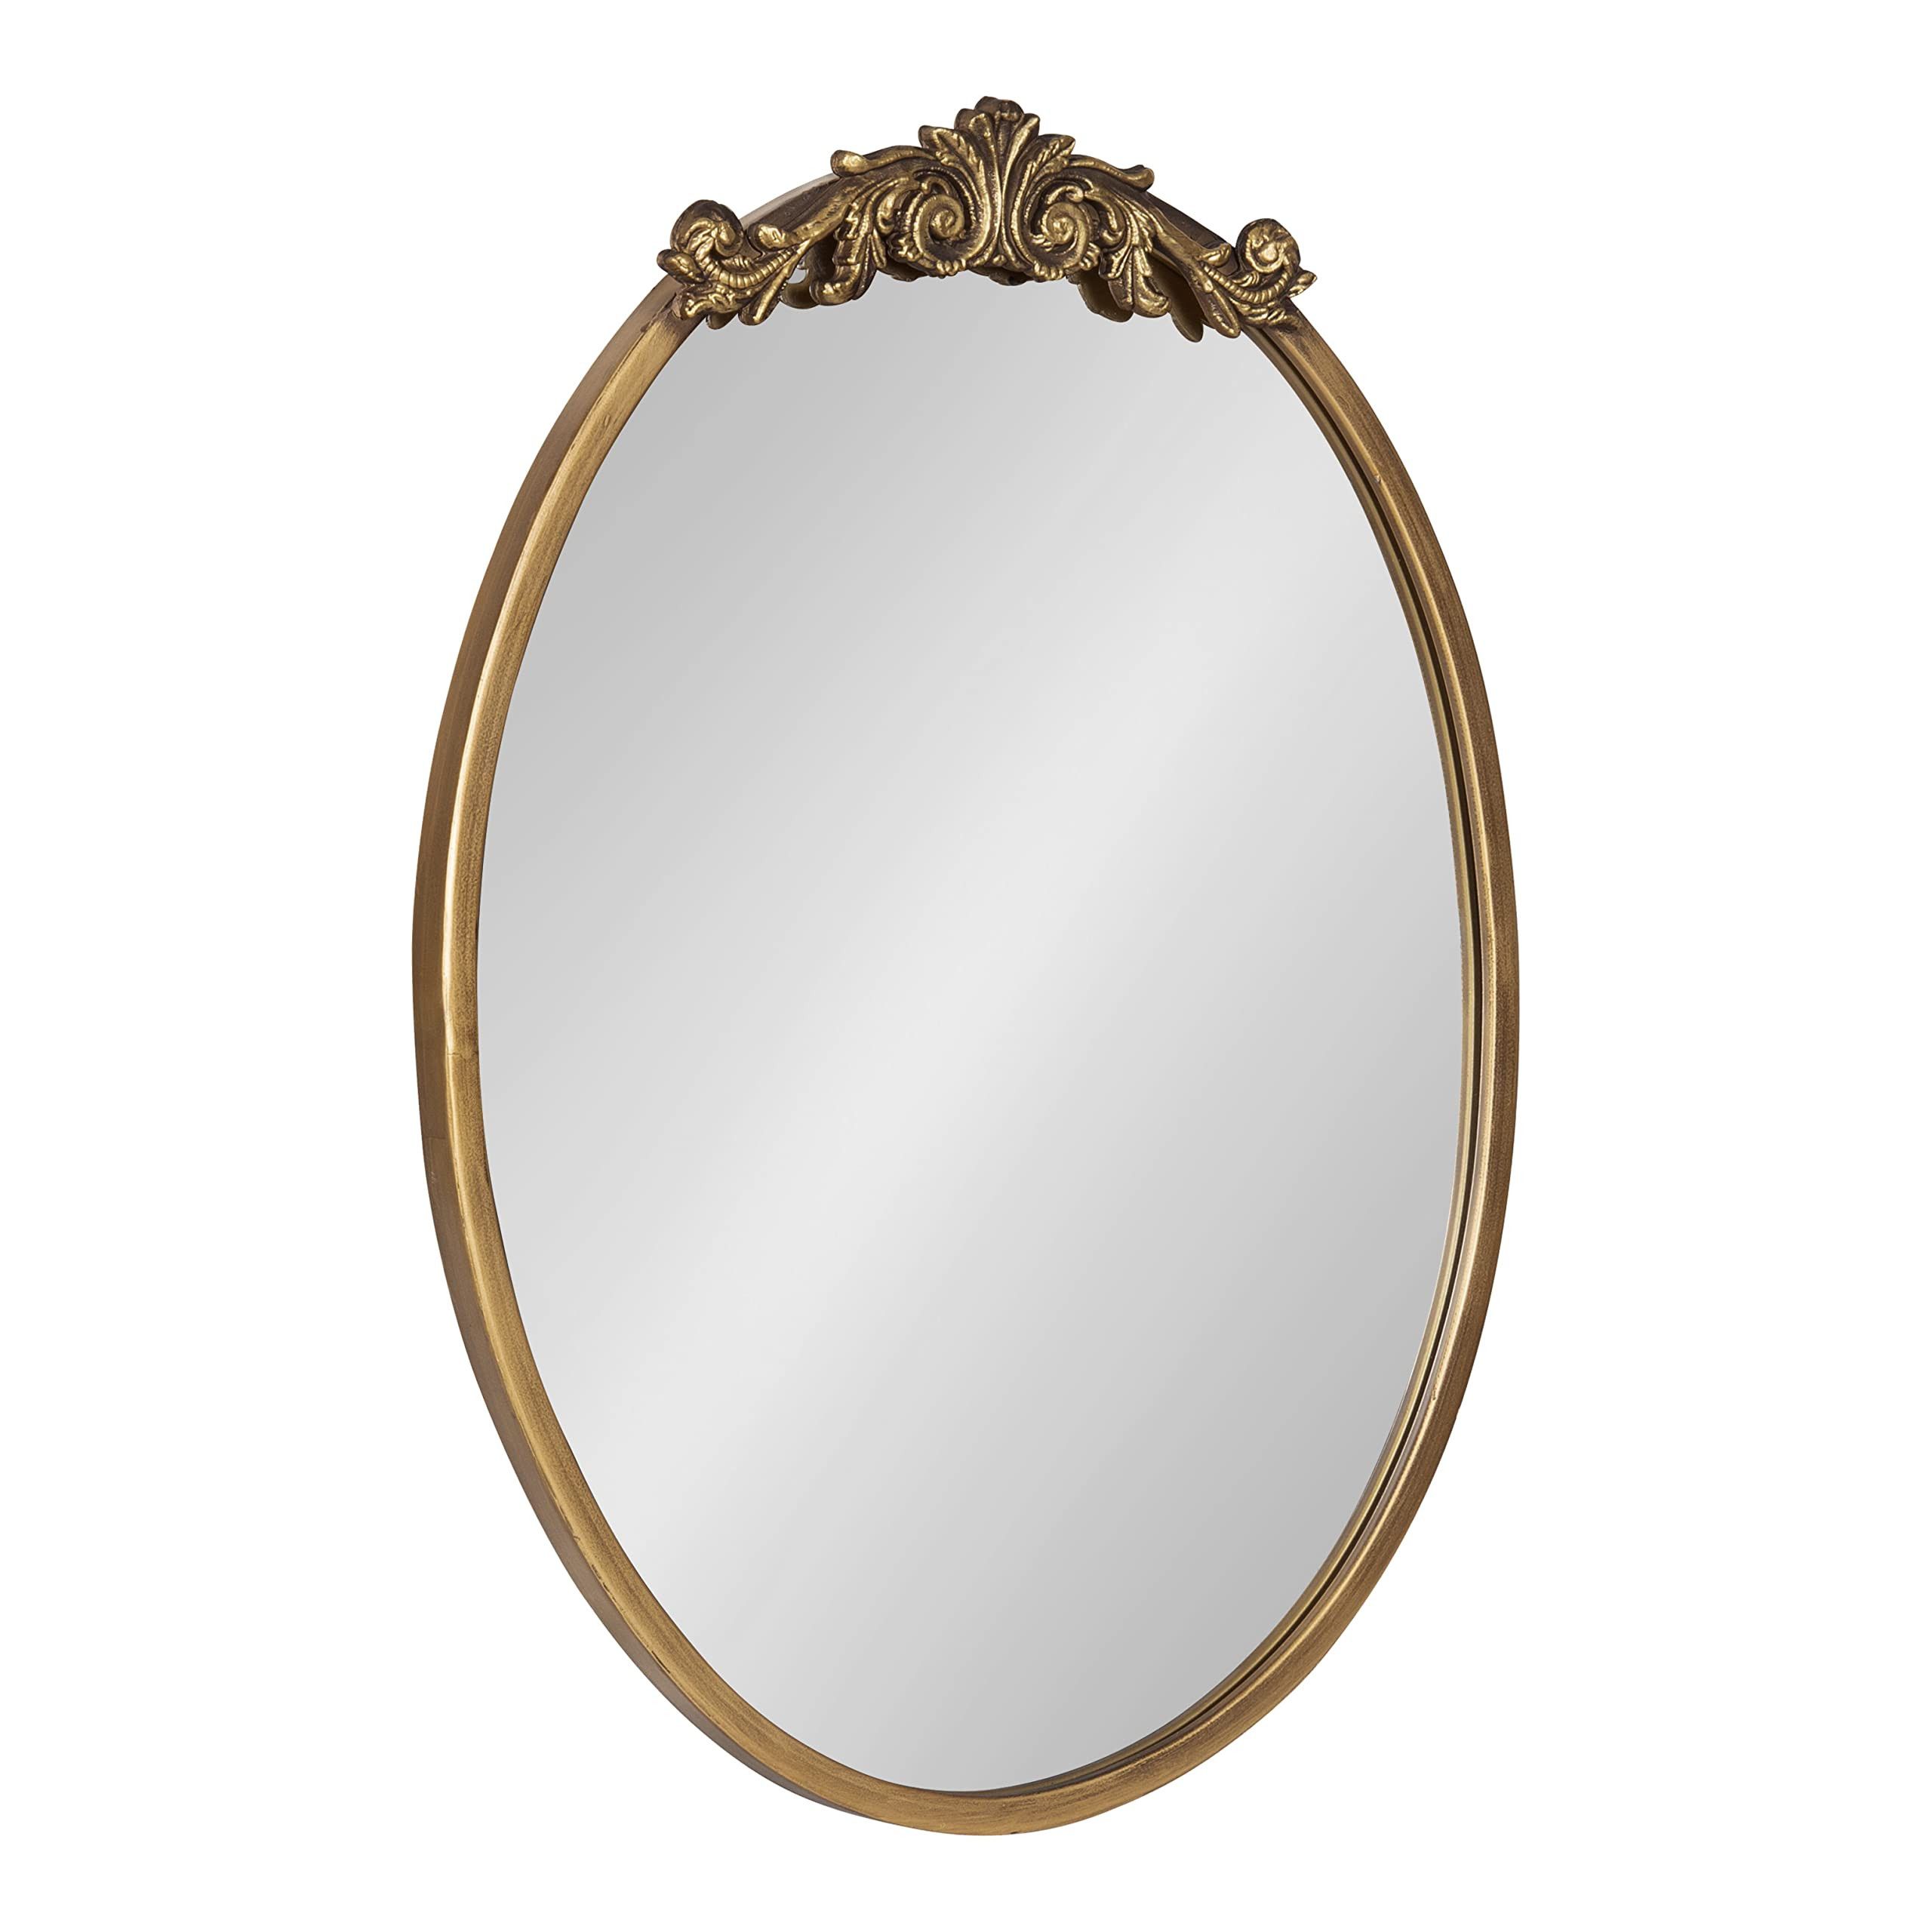 Kate and Laurel Arendahl Ornate Glam Oval Wall Mirror, 18 x 24, Antique Gold, Beautiful Bohemian Mir | Amazon (US)